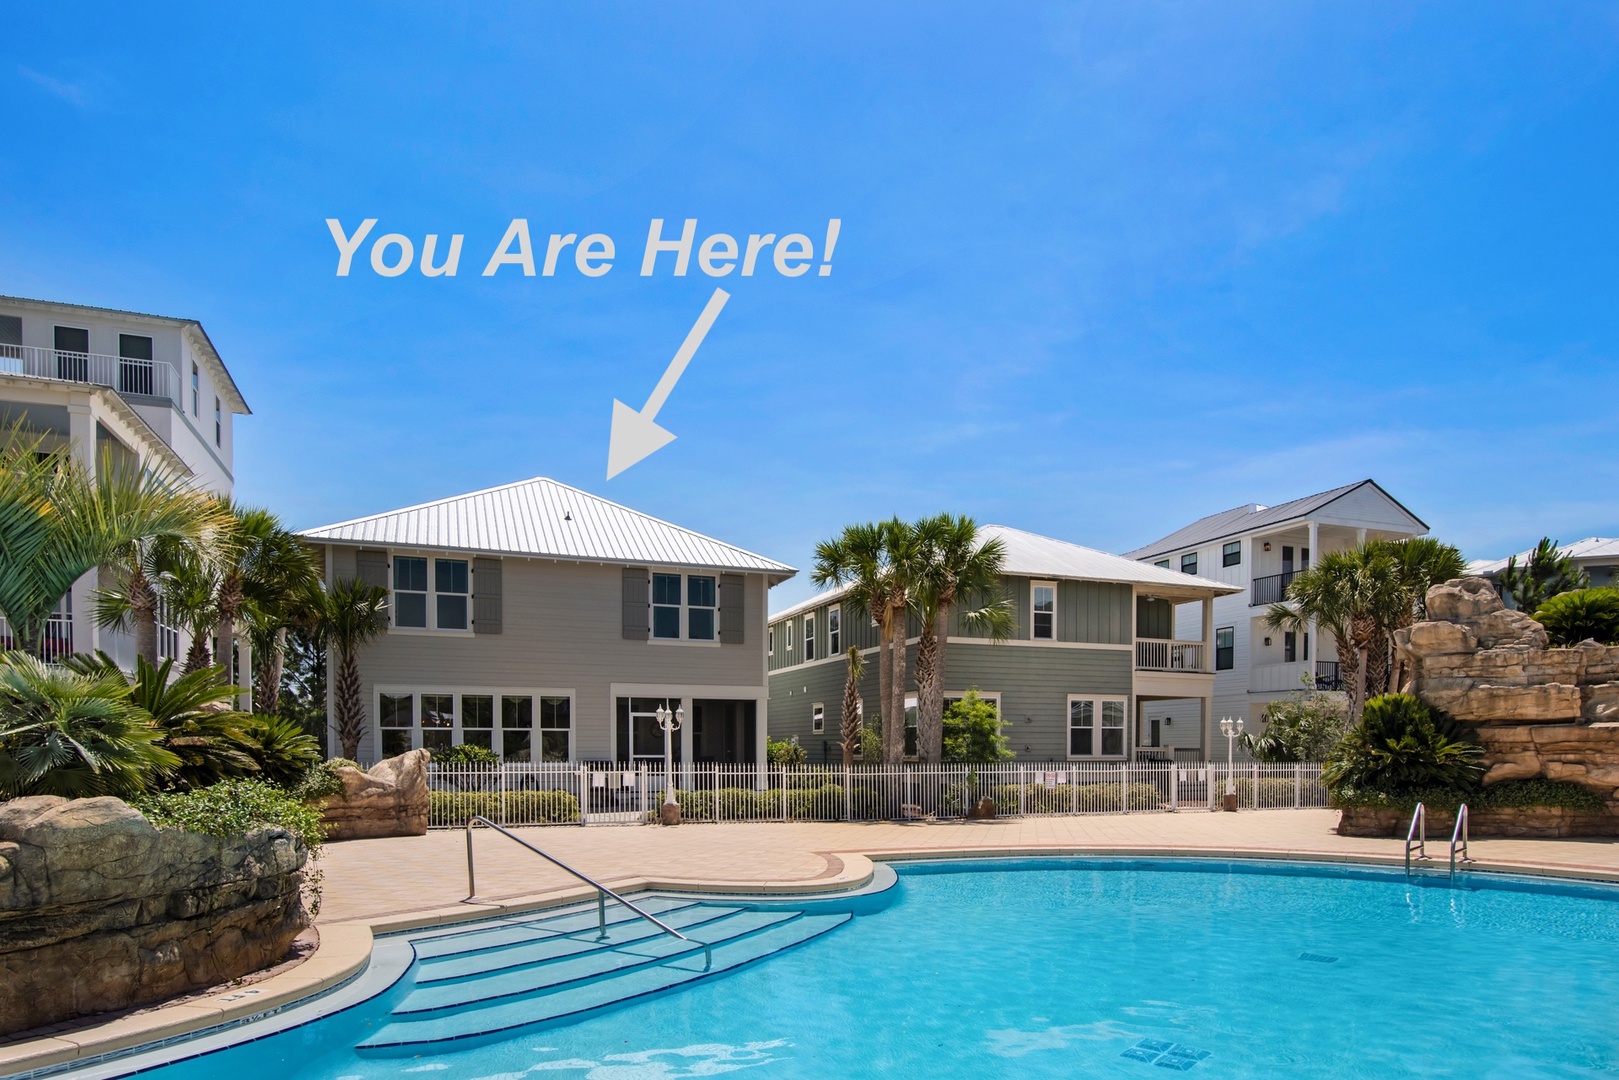 Welcome home to "Bellaboo's Beach Place" - Your home away from home!